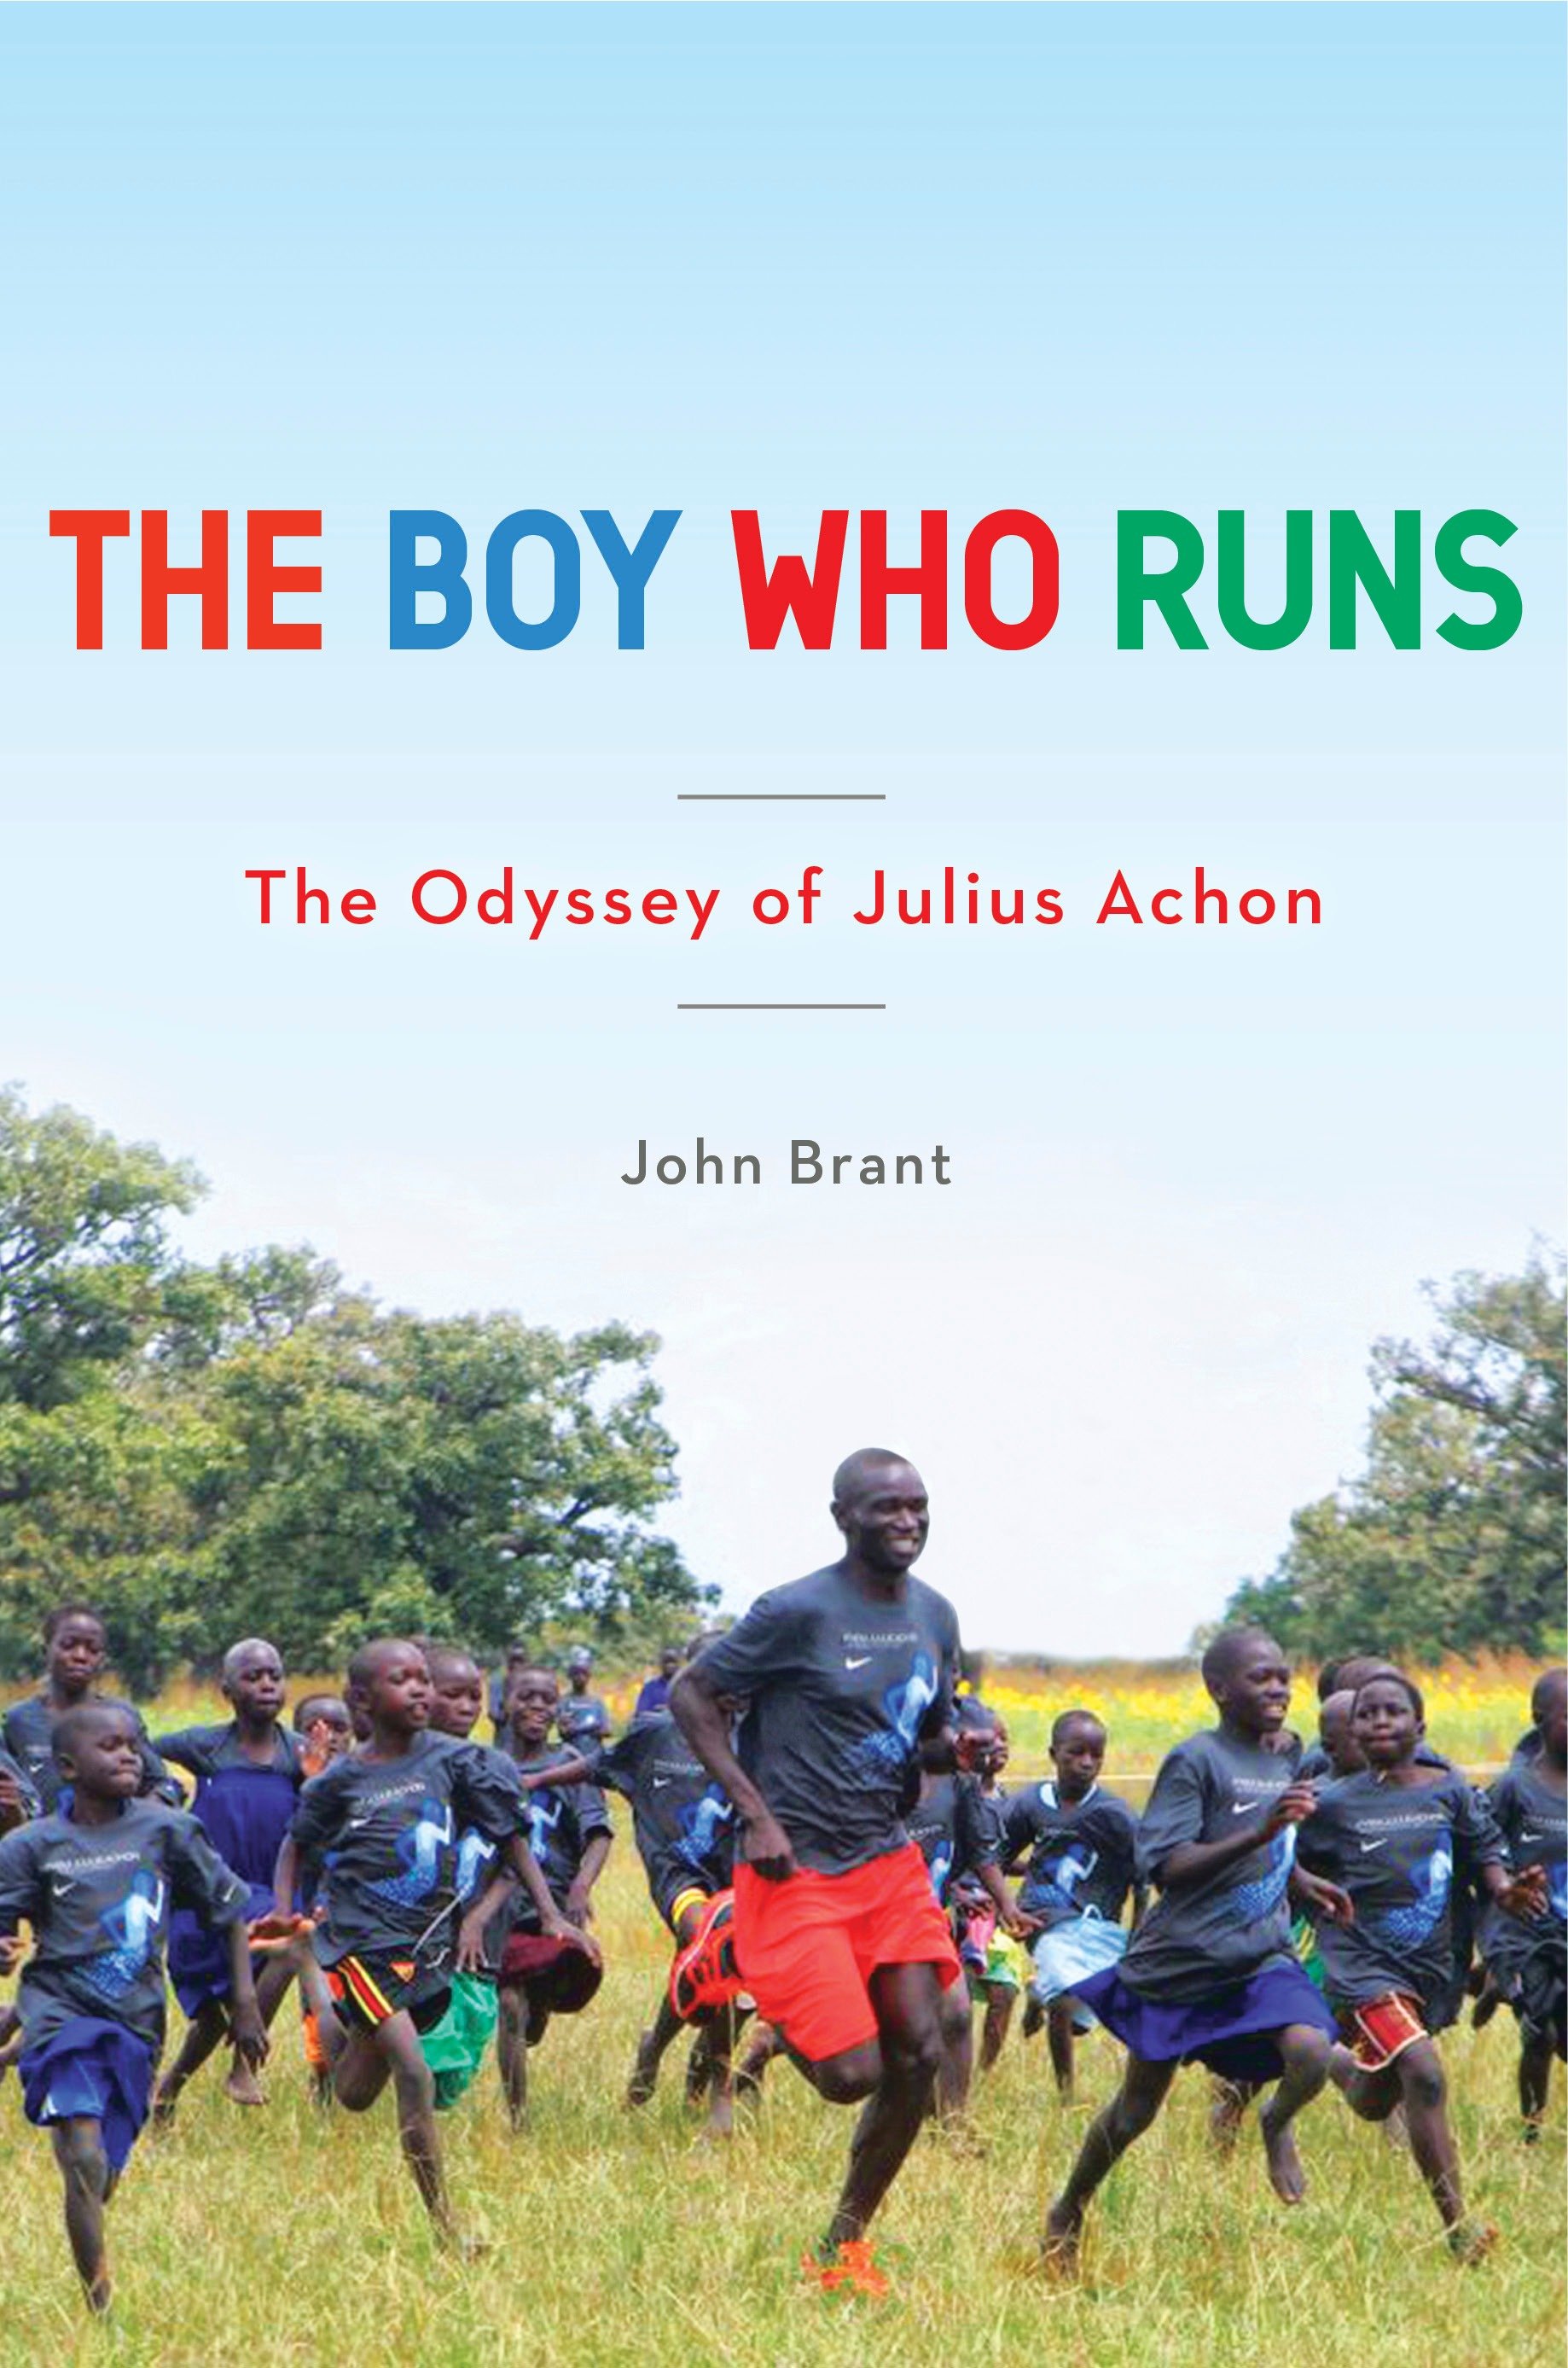 The boy who runs the odyssey of Julius Achon cover image